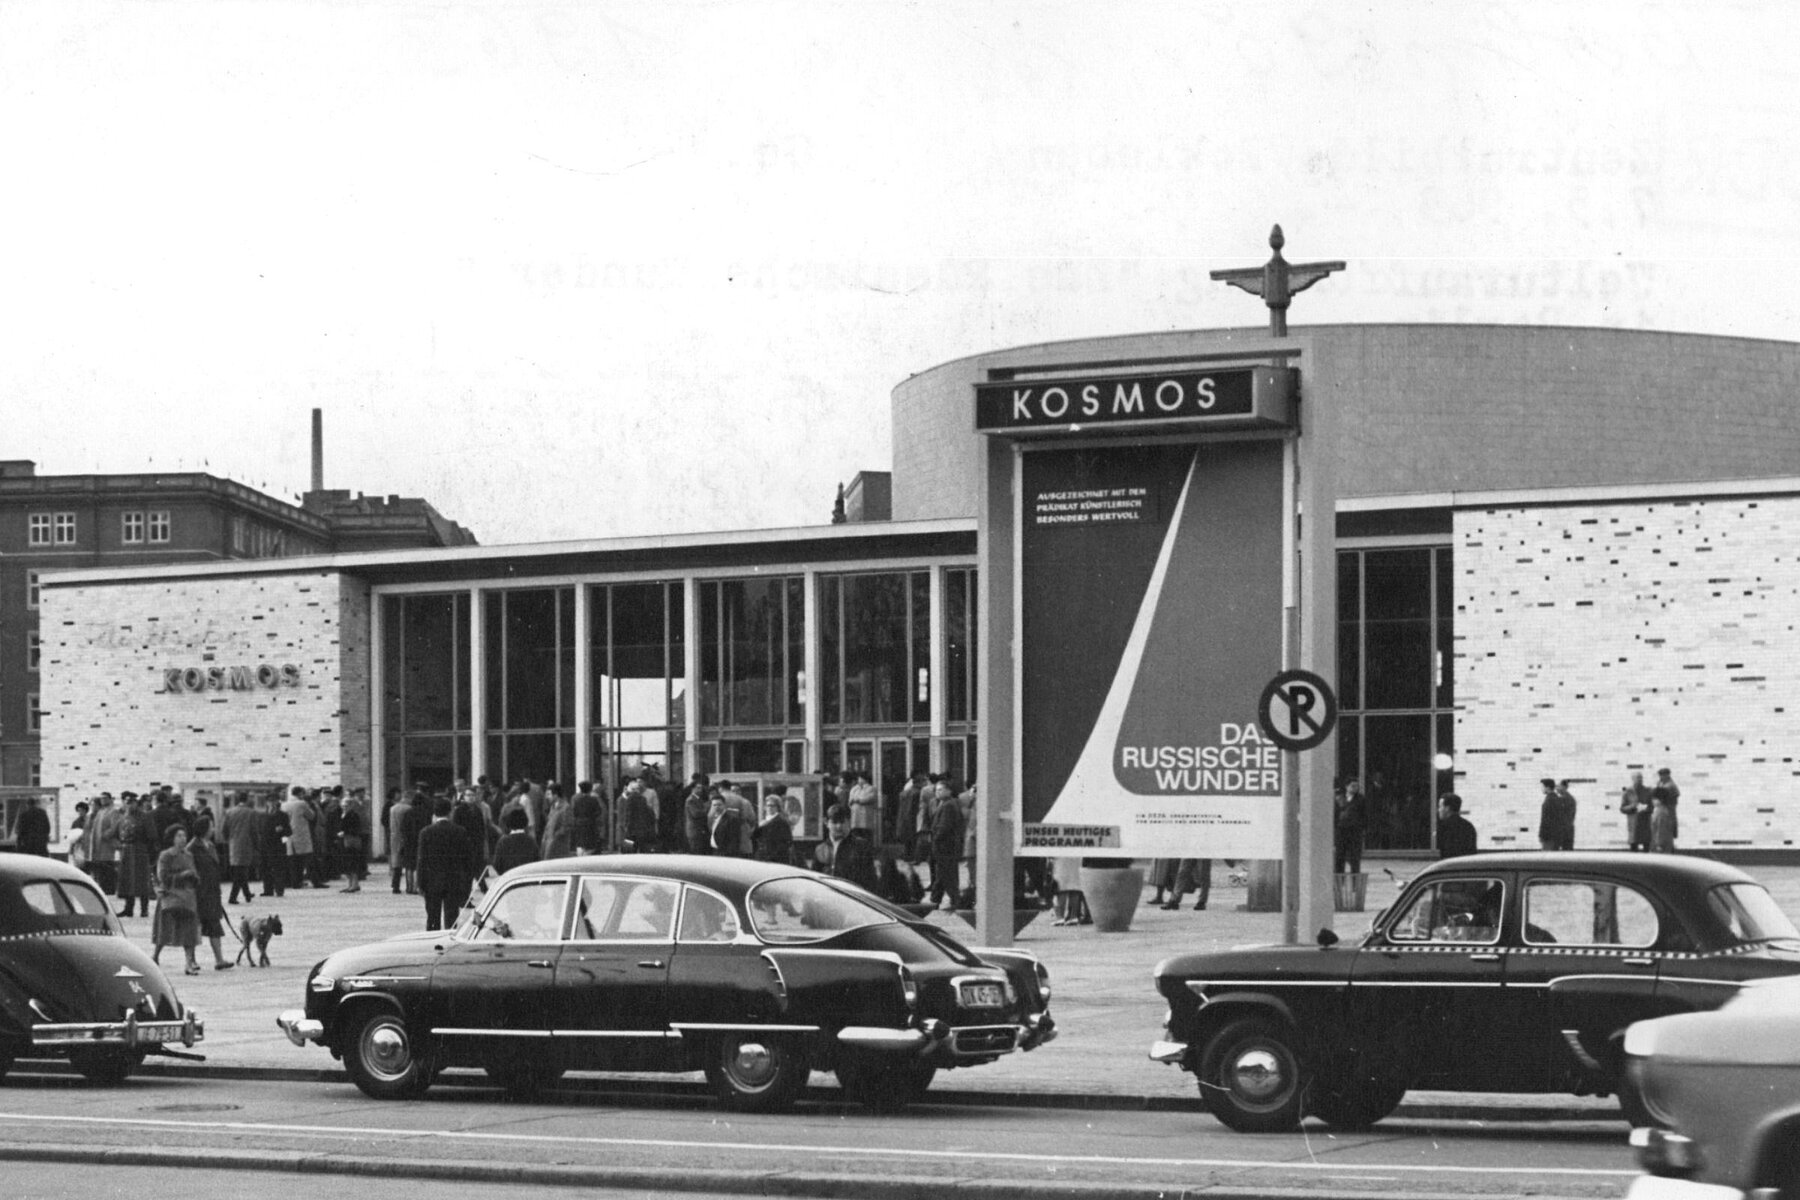 Exterior shot of the Kosmos Cinema building with a rotunda in the middle. There are many people and three cars in front of the cinema.